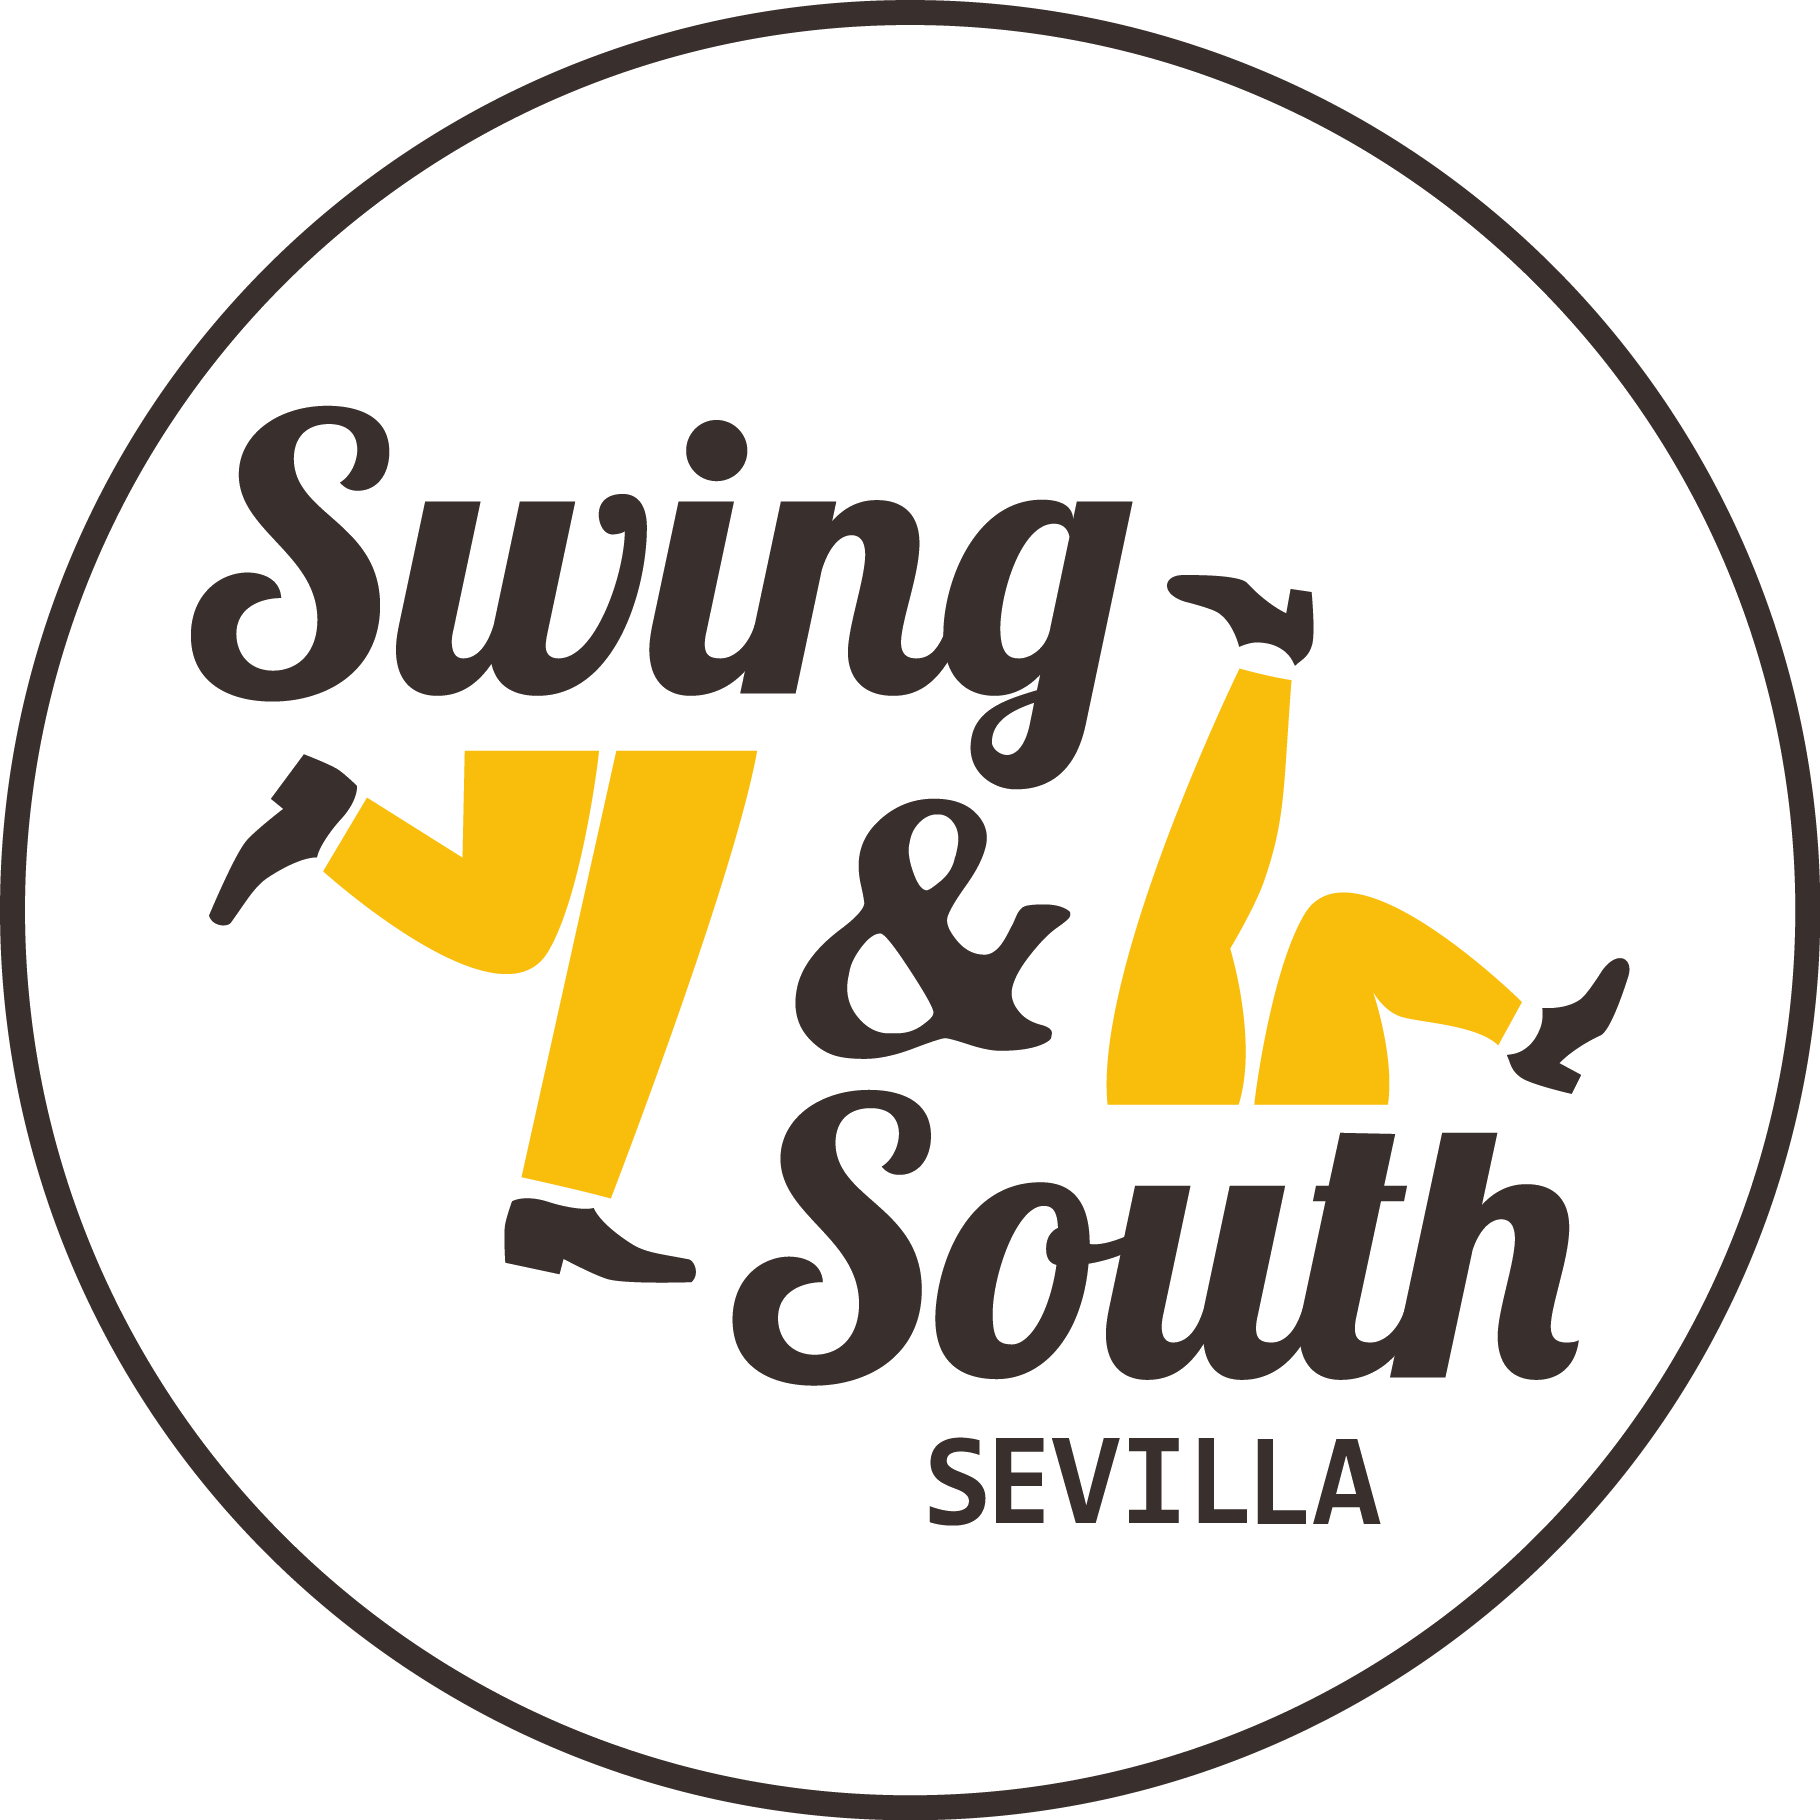 Swing and South